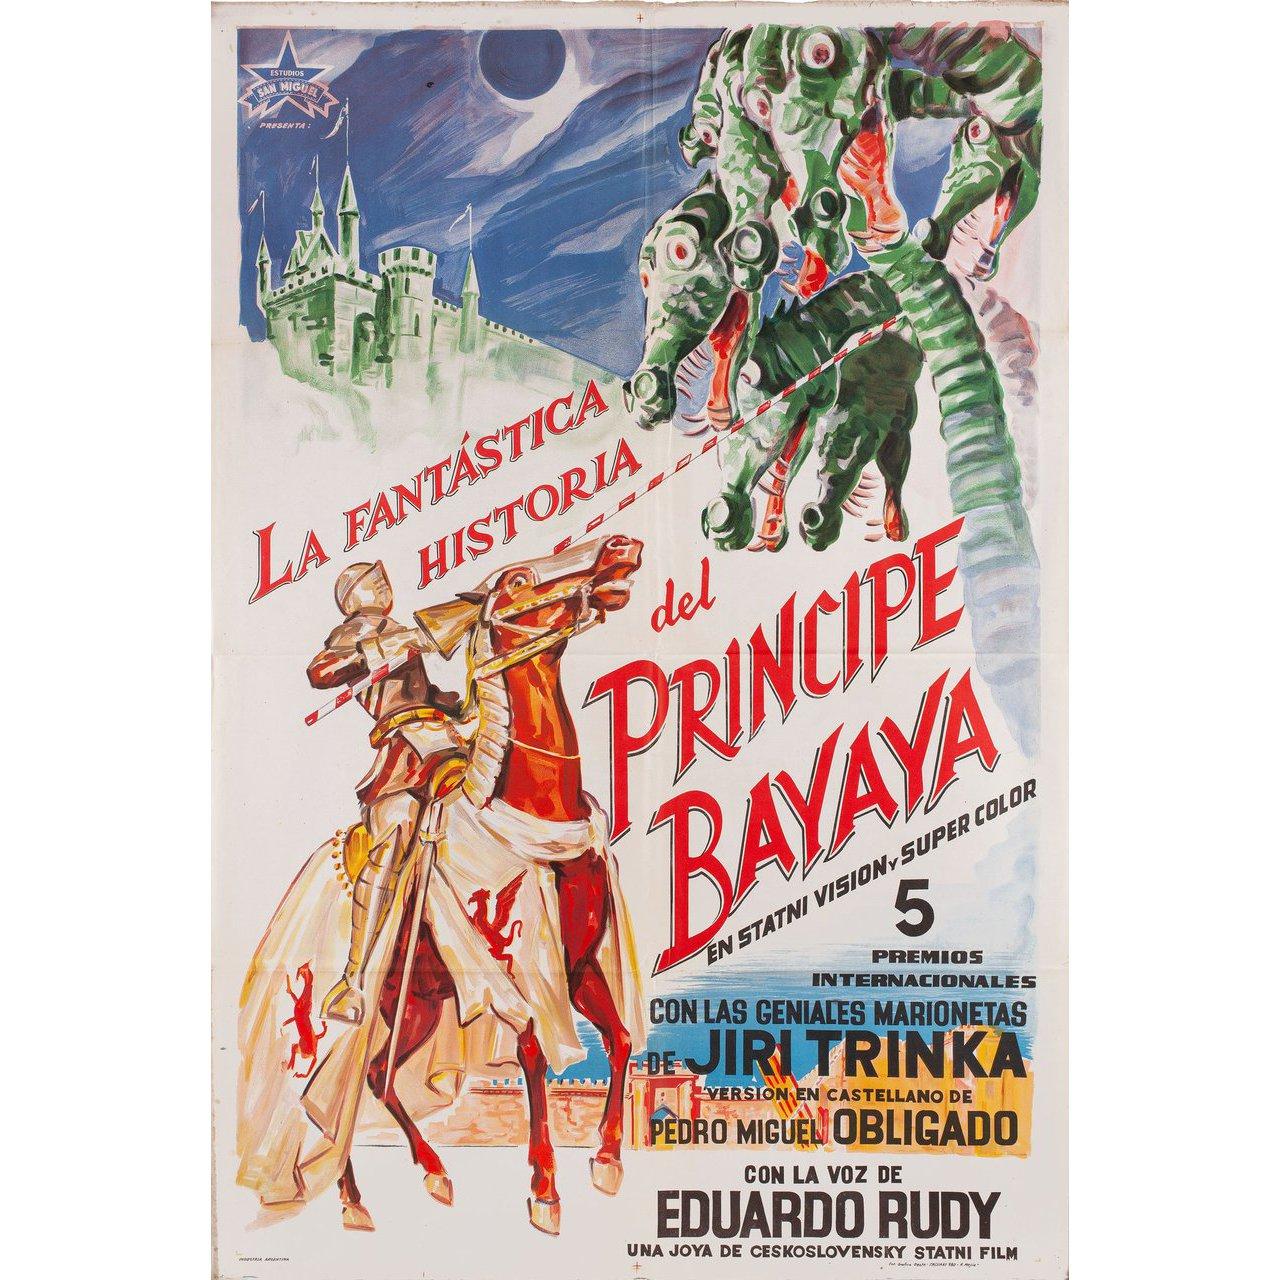 Bajaja 1950 Argentine Film Poster In Fair Condition For Sale In New York, NY